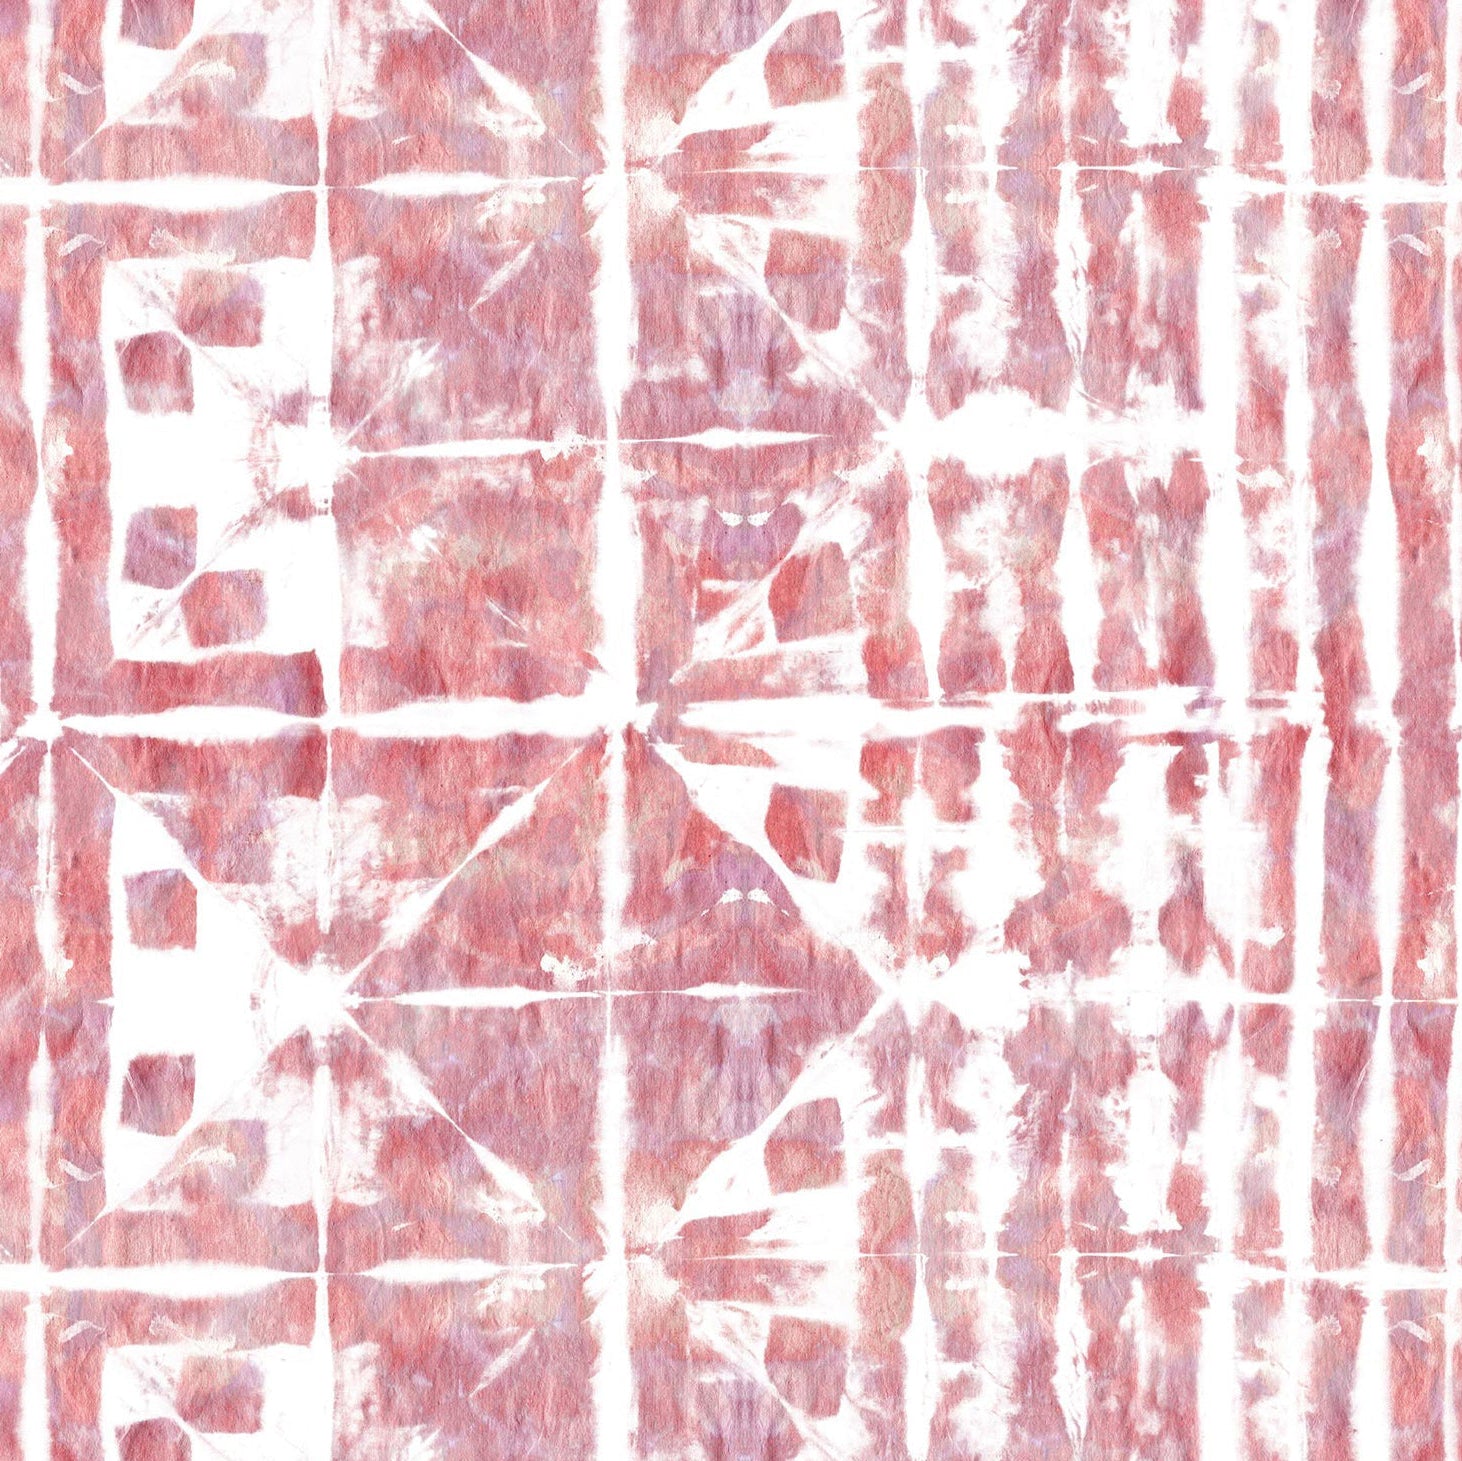 Detail of wallpaper in an abstract dyed grid print in mottled white, pink and red.